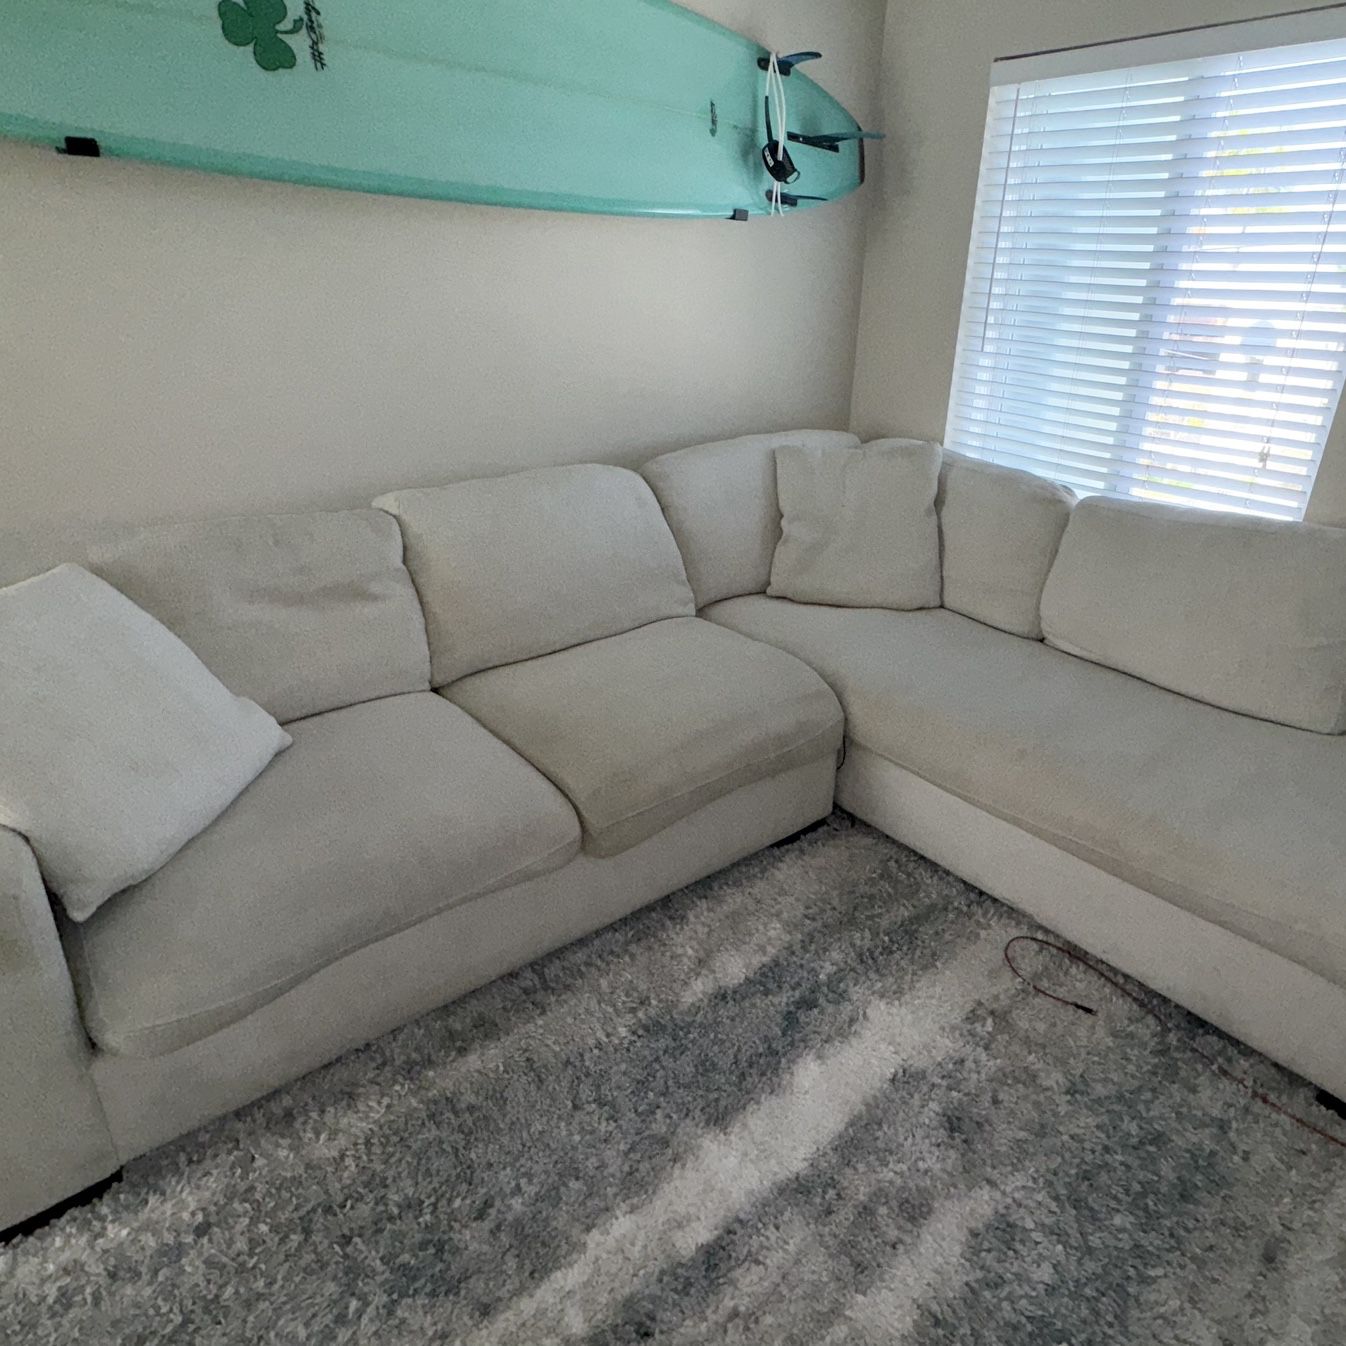 Comfy 2-Piece Sectional Couch - $200